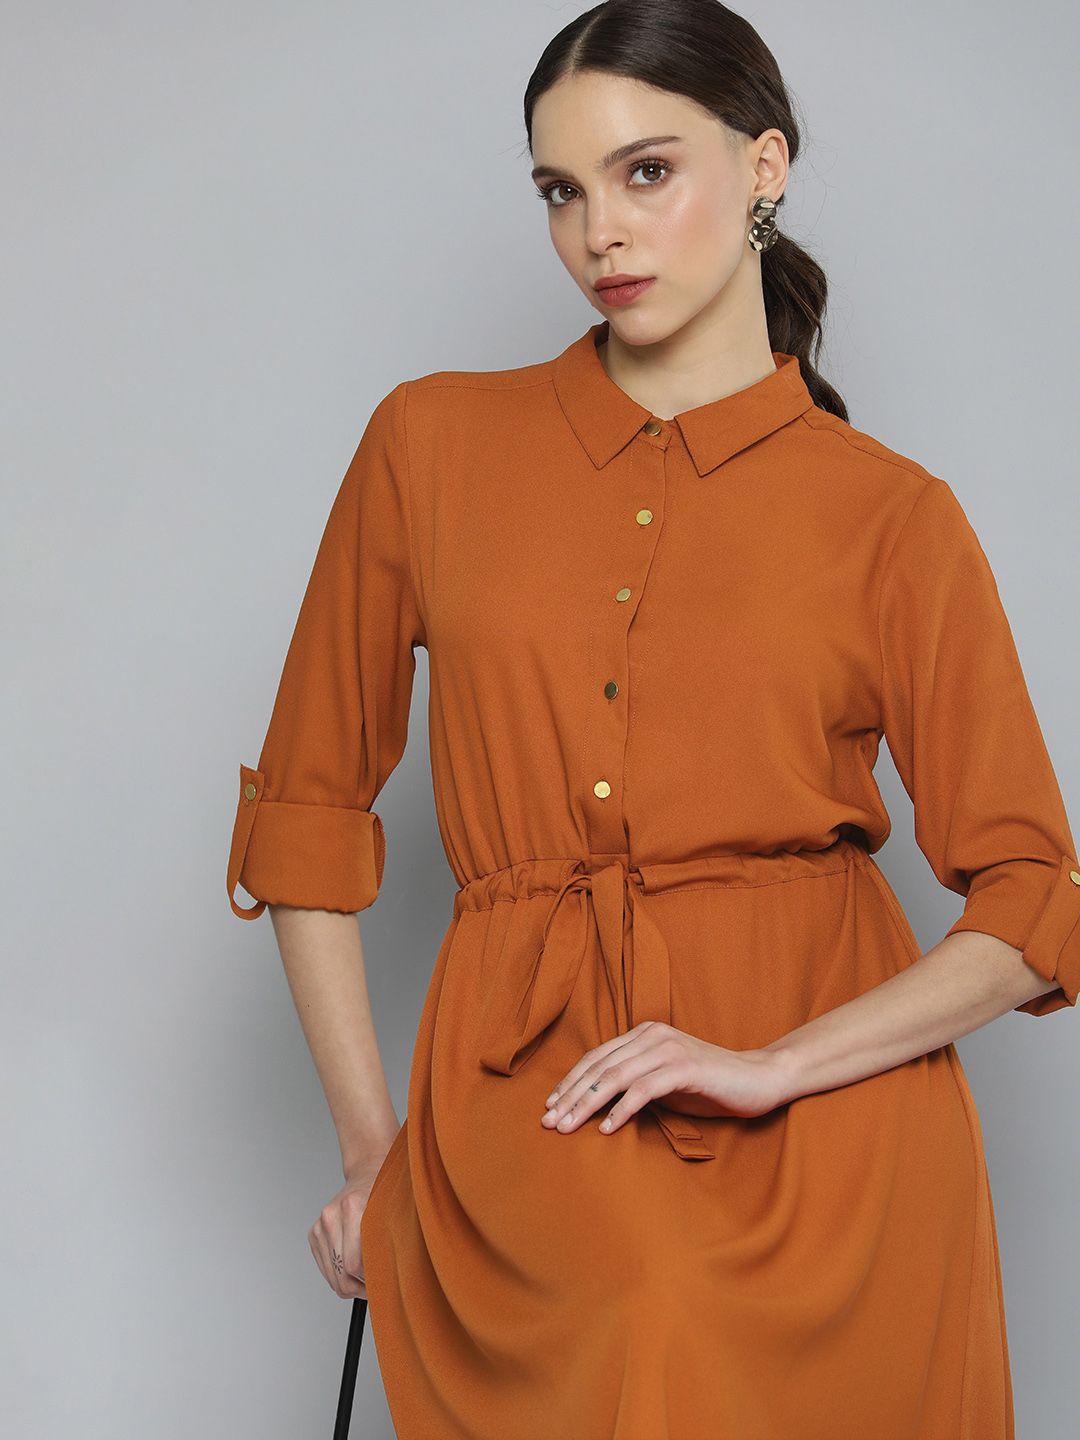 Chemistry Brown Solid Shirt Dress Price in India